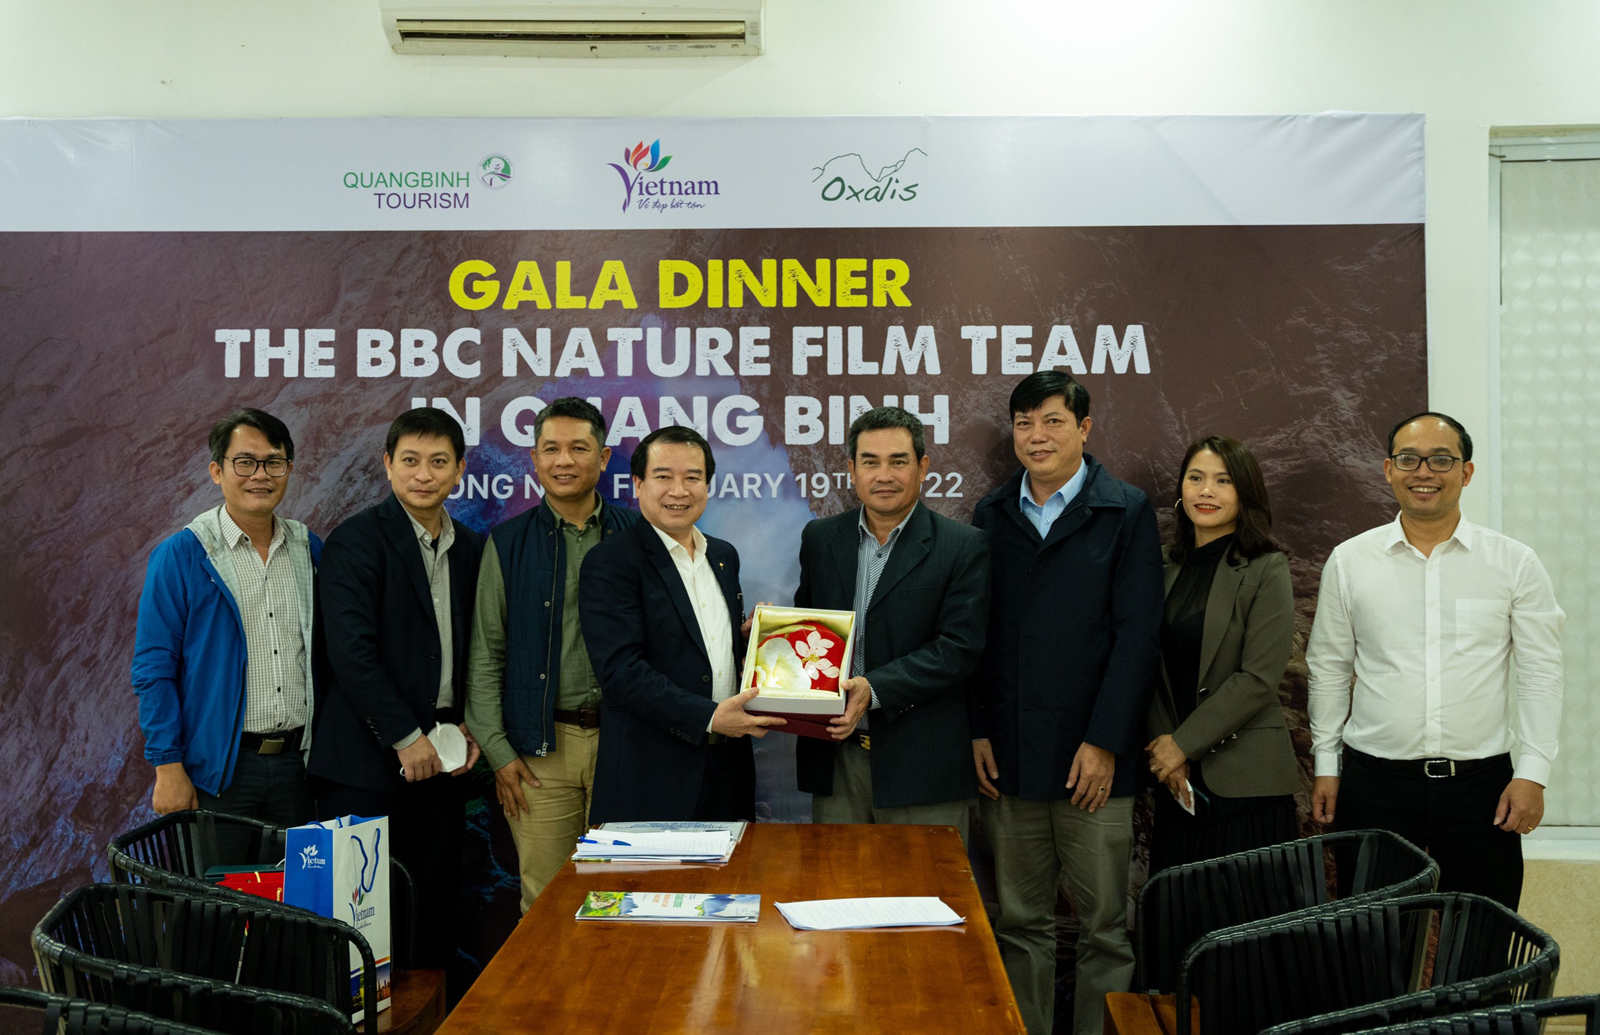 VNAT’s Vice Chairman Ha Van Sieu has a working session with Quang Binh Province on tourism development